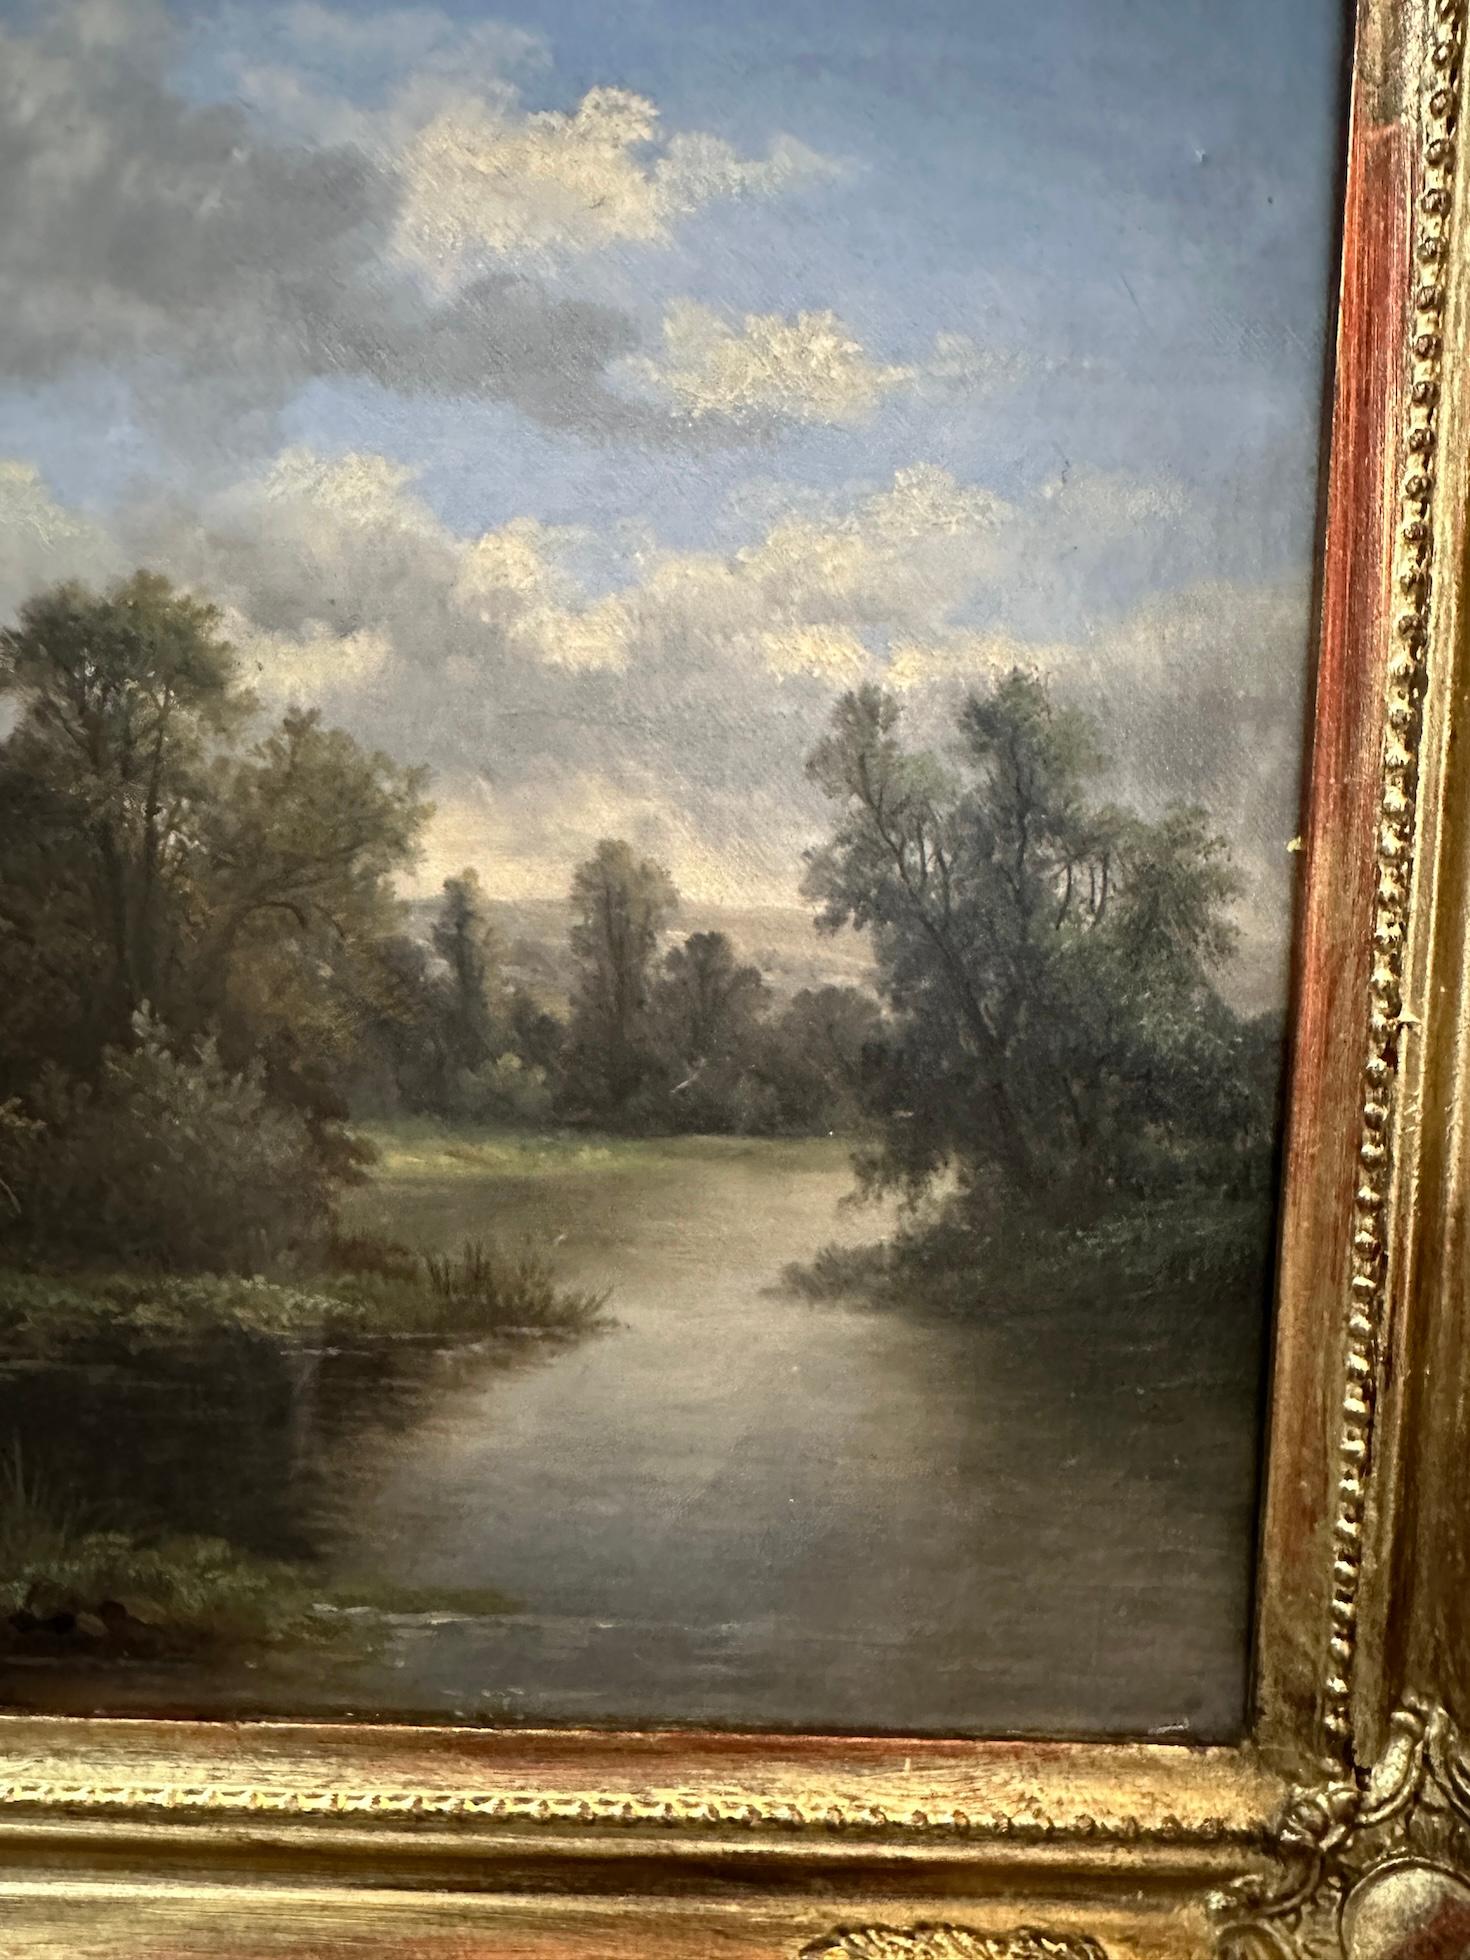 19th century English landscape with Oak and Yew trees on a pathway For Sale 1